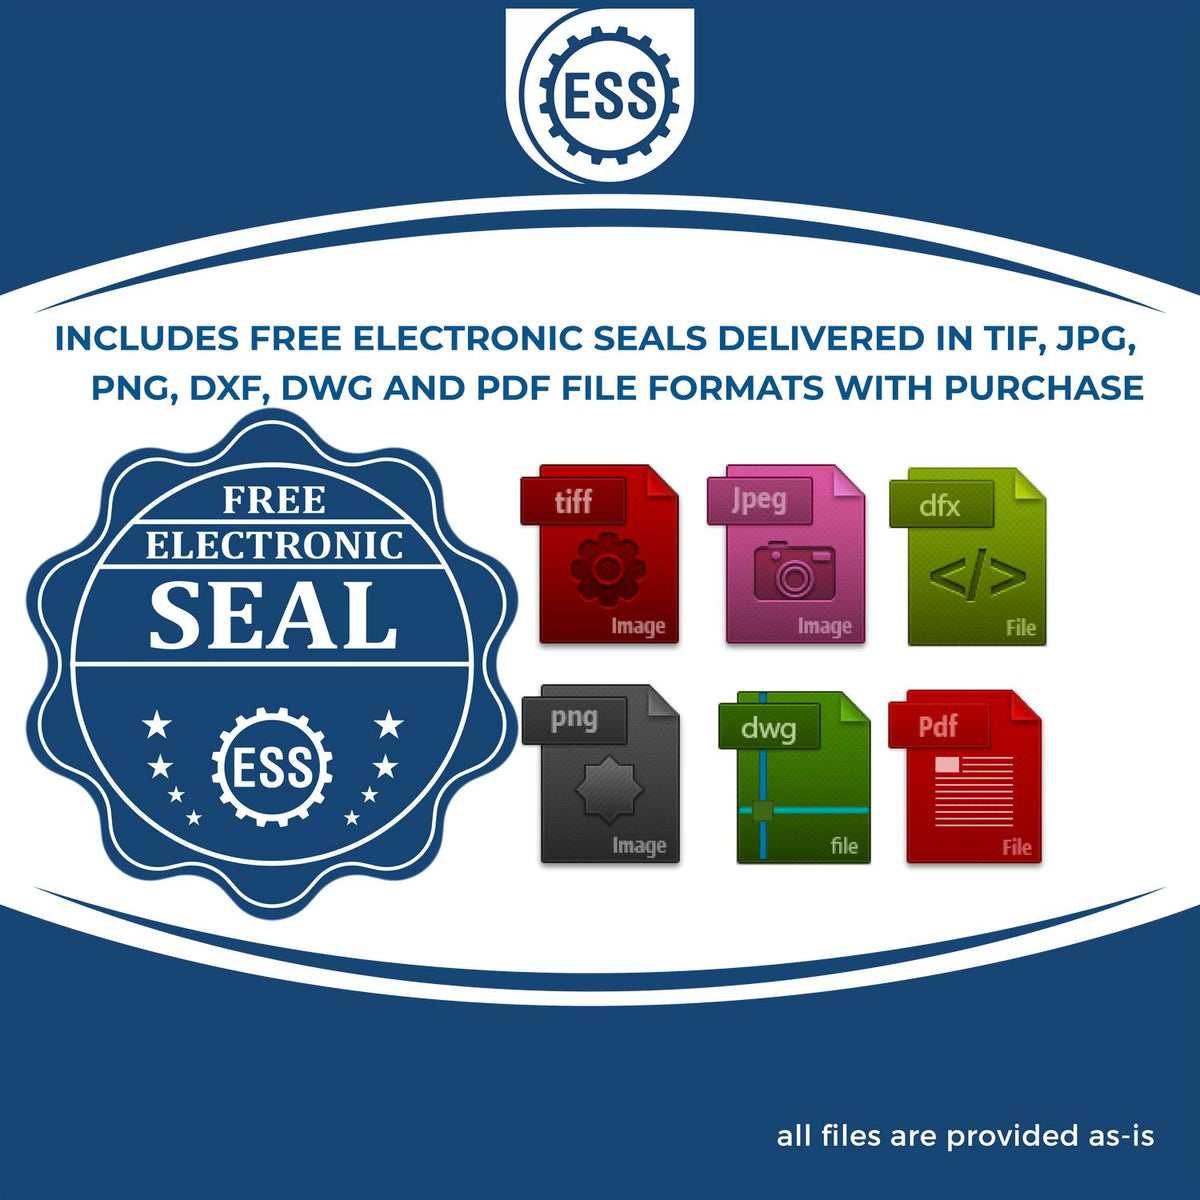 An infographic for the free electronic seal for the New Jersey Professional Geologist Seal Stamp illustrating the different file type icons such as DXF, DWG, TIF, JPG and PNG.